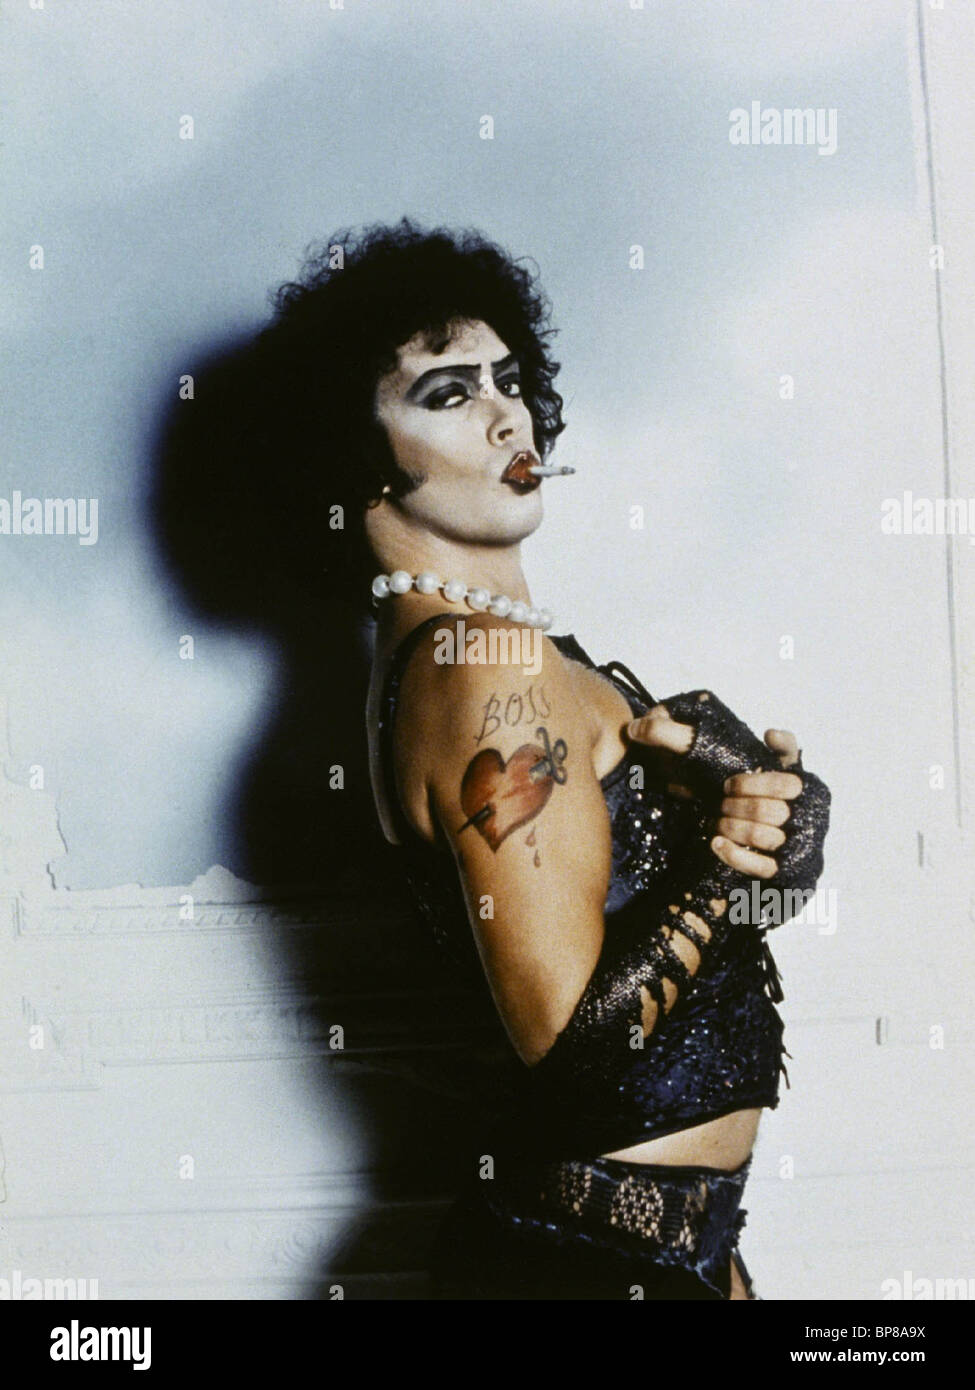 TIM CURRY THE ROCKY HORROR PICTURE SHOW (1975 Stock Photo - Alamy